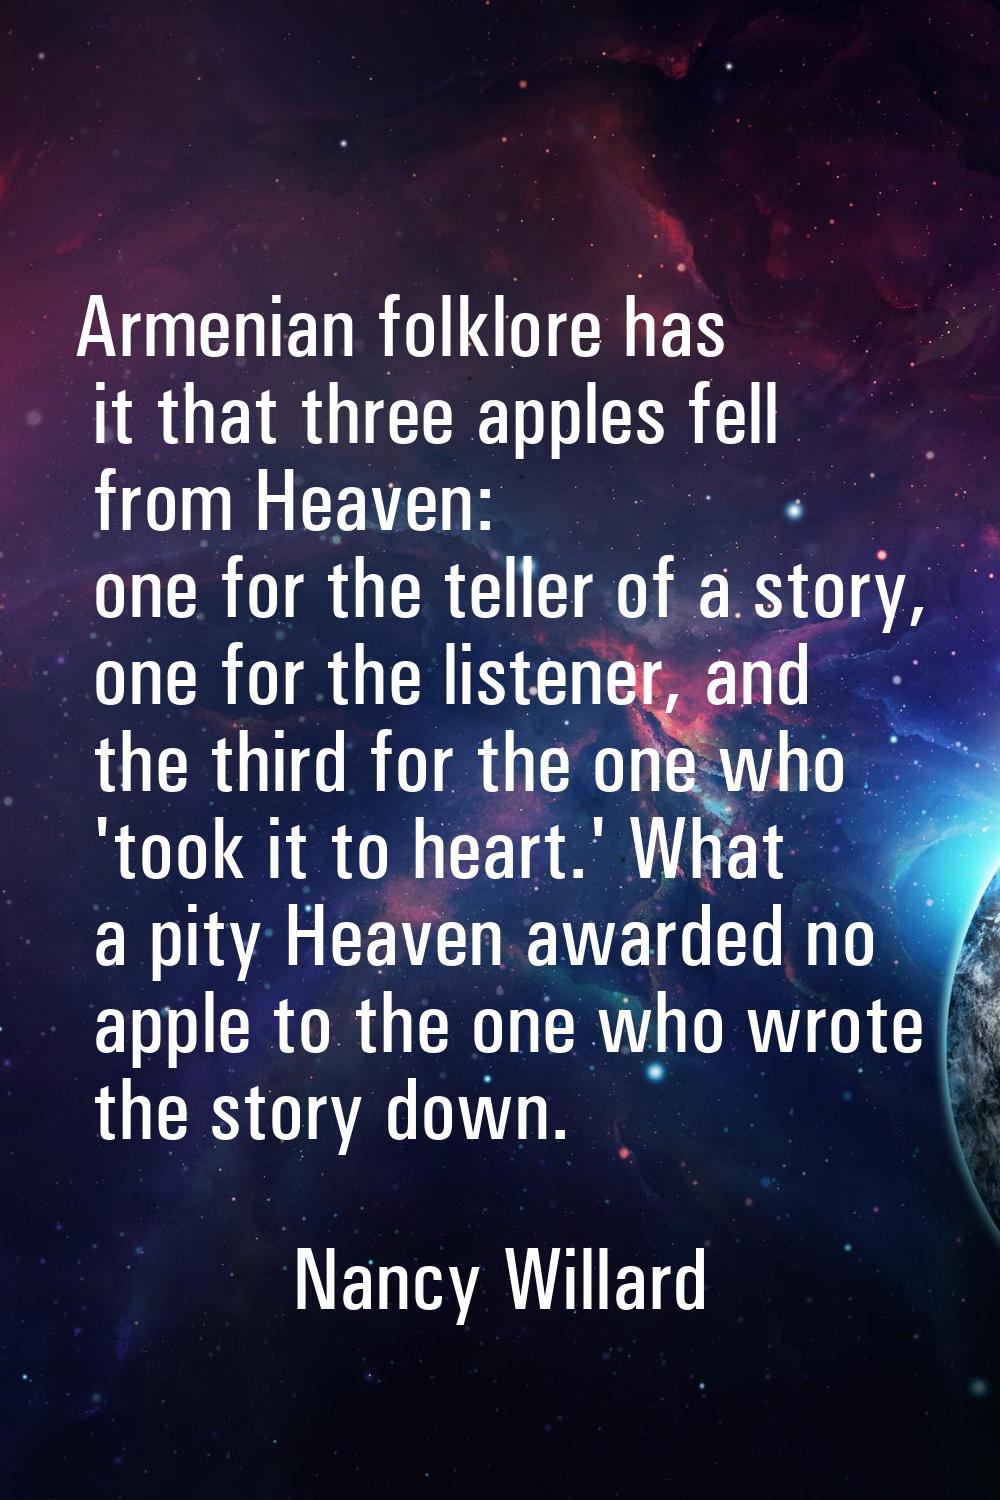 Armenian folklore has it that three apples fell from Heaven: one for the teller of a story, one for